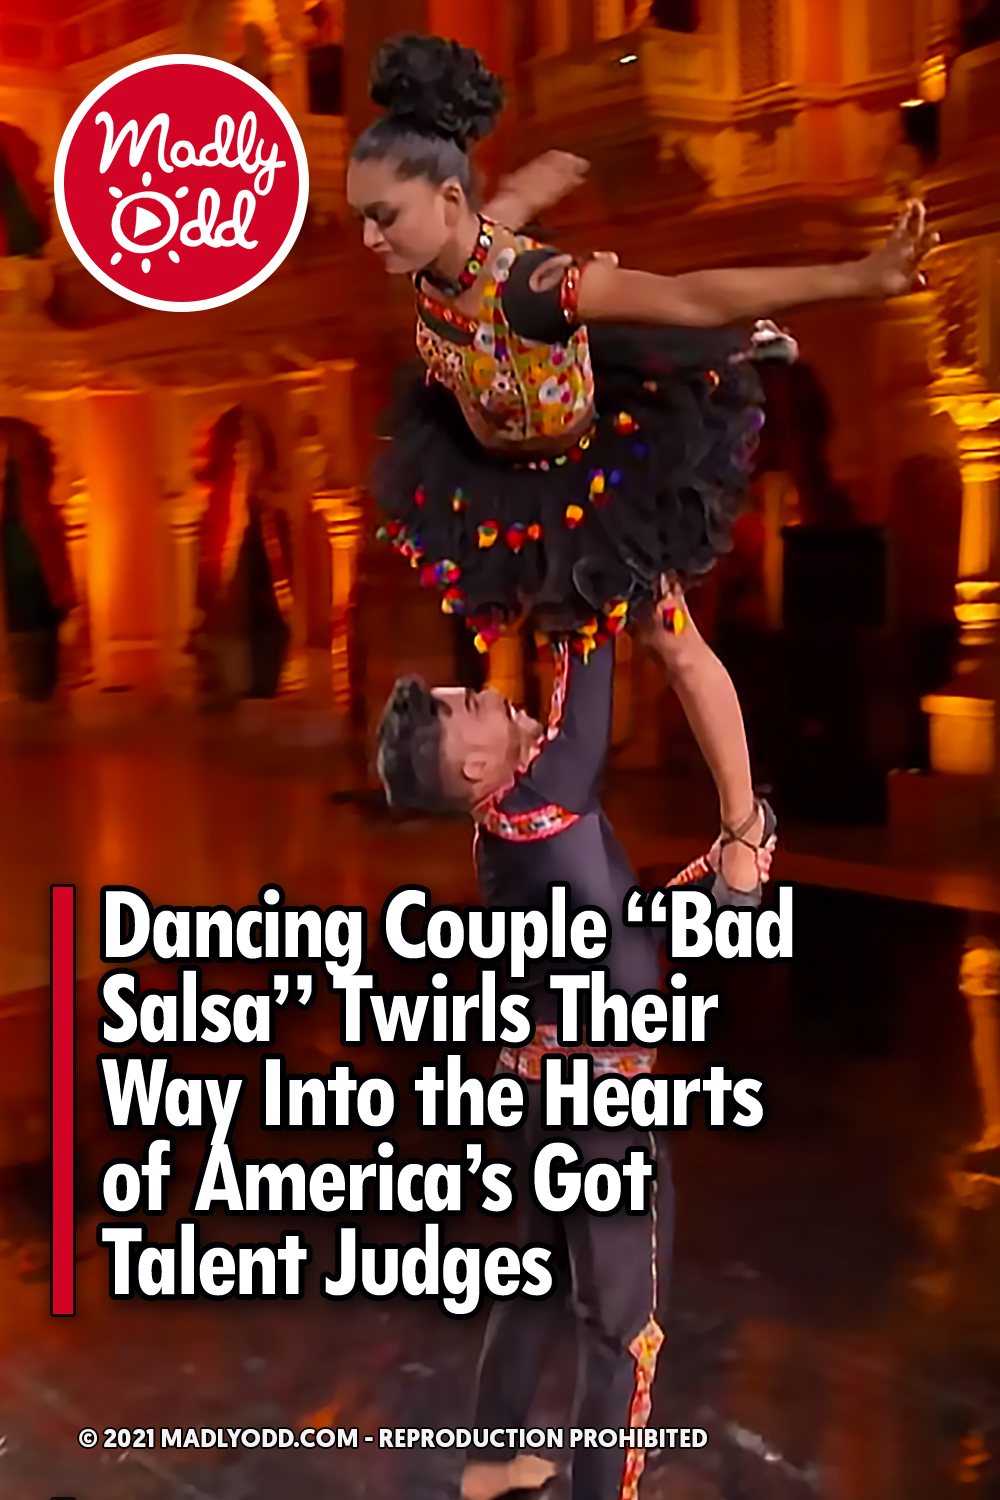 Dancing Couple “Bad Salsa” Twirls Their Way Into the Hearts of America’s Got Talent Judges